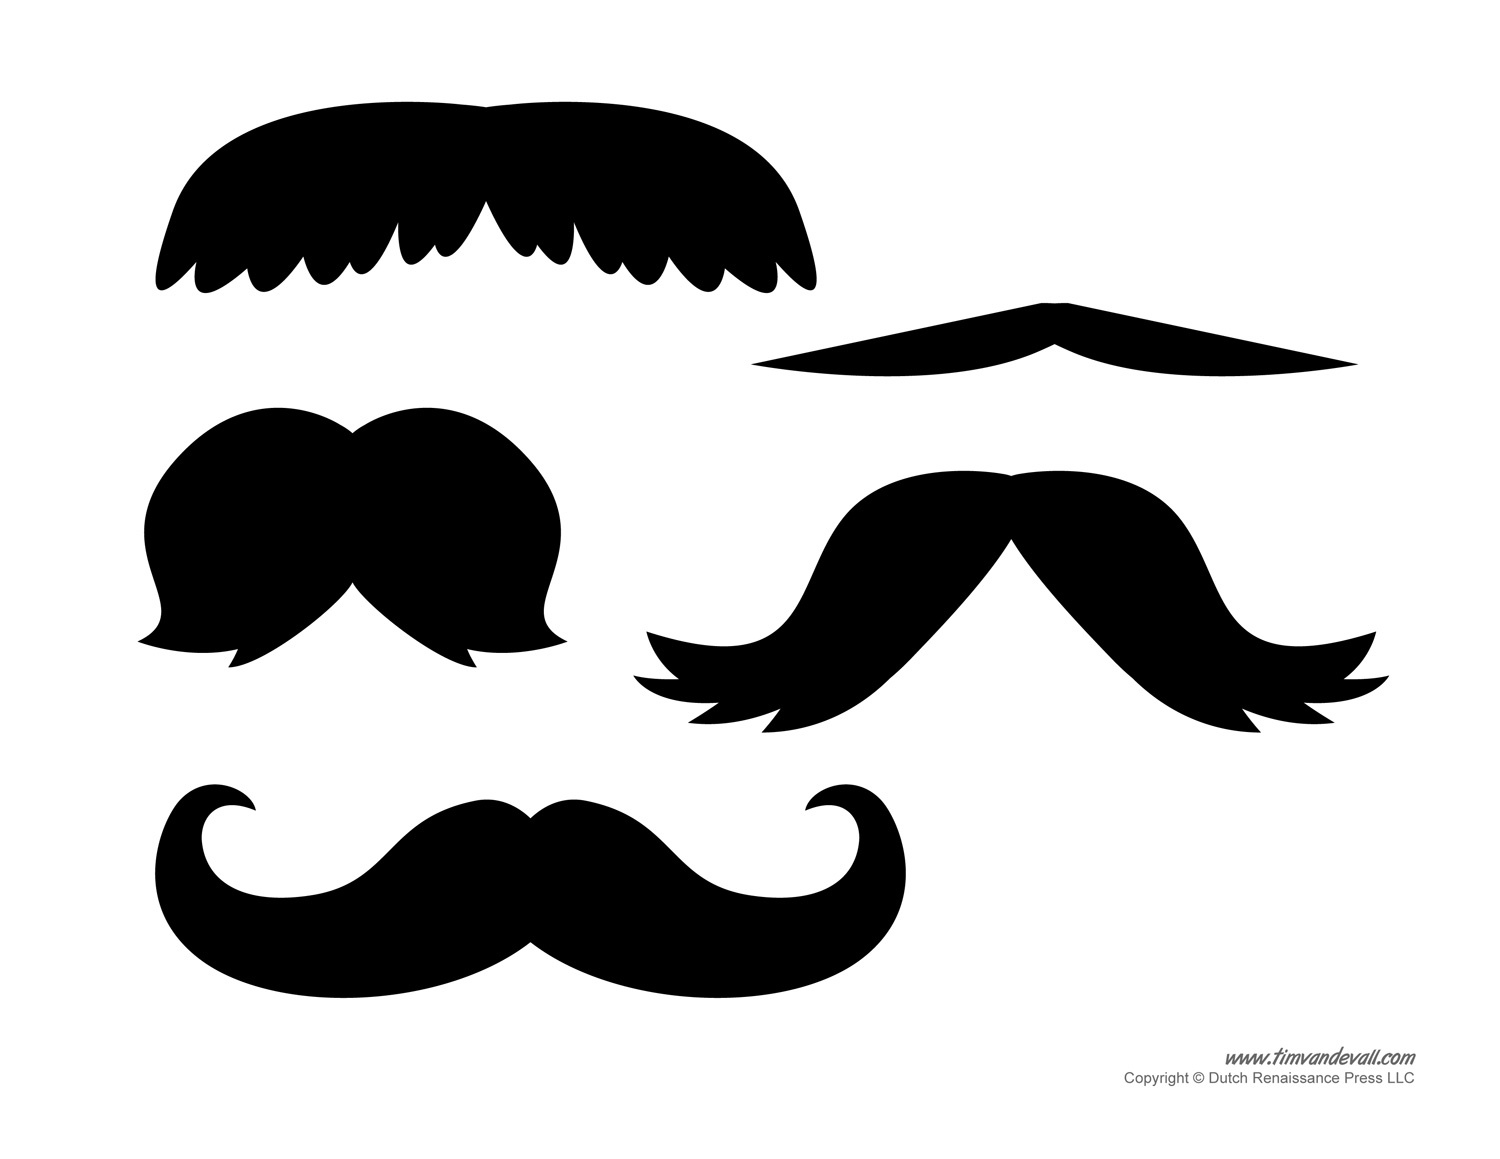 Printable Mustache Templates | Mustaches For Kids - Free Printable Mustache